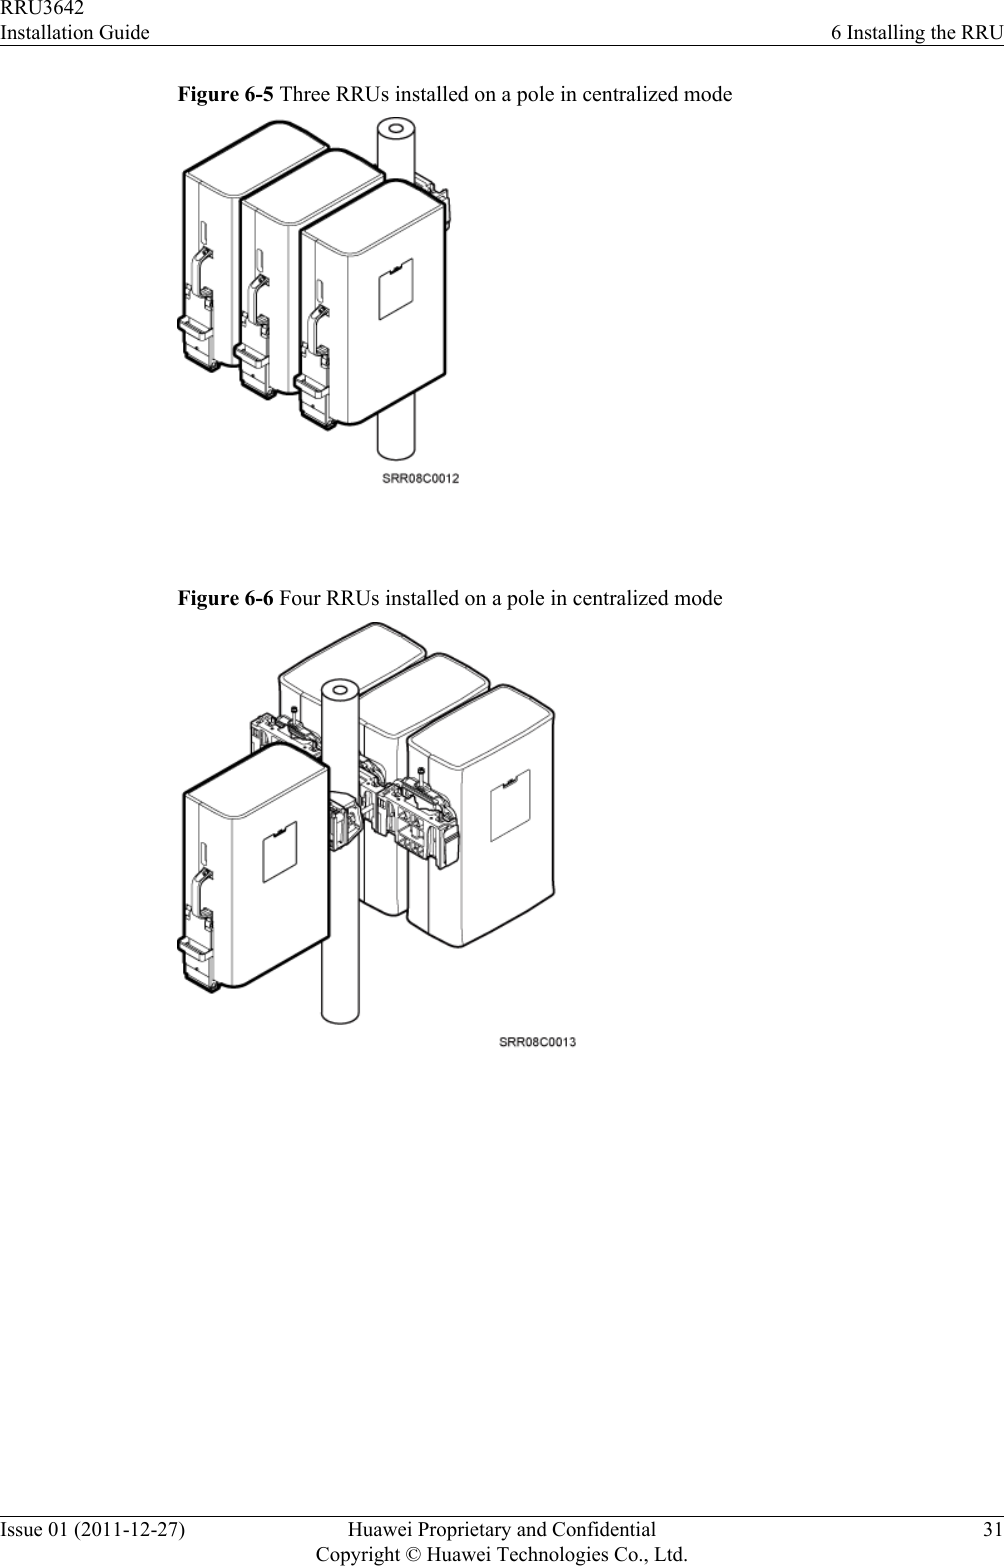 Figure 6-5 Three RRUs installed on a pole in centralized mode Figure 6-6 Four RRUs installed on a pole in centralized mode RRU3642Installation Guide 6 Installing the RRUIssue 01 (2011-12-27) Huawei Proprietary and ConfidentialCopyright © Huawei Technologies Co., Ltd.31